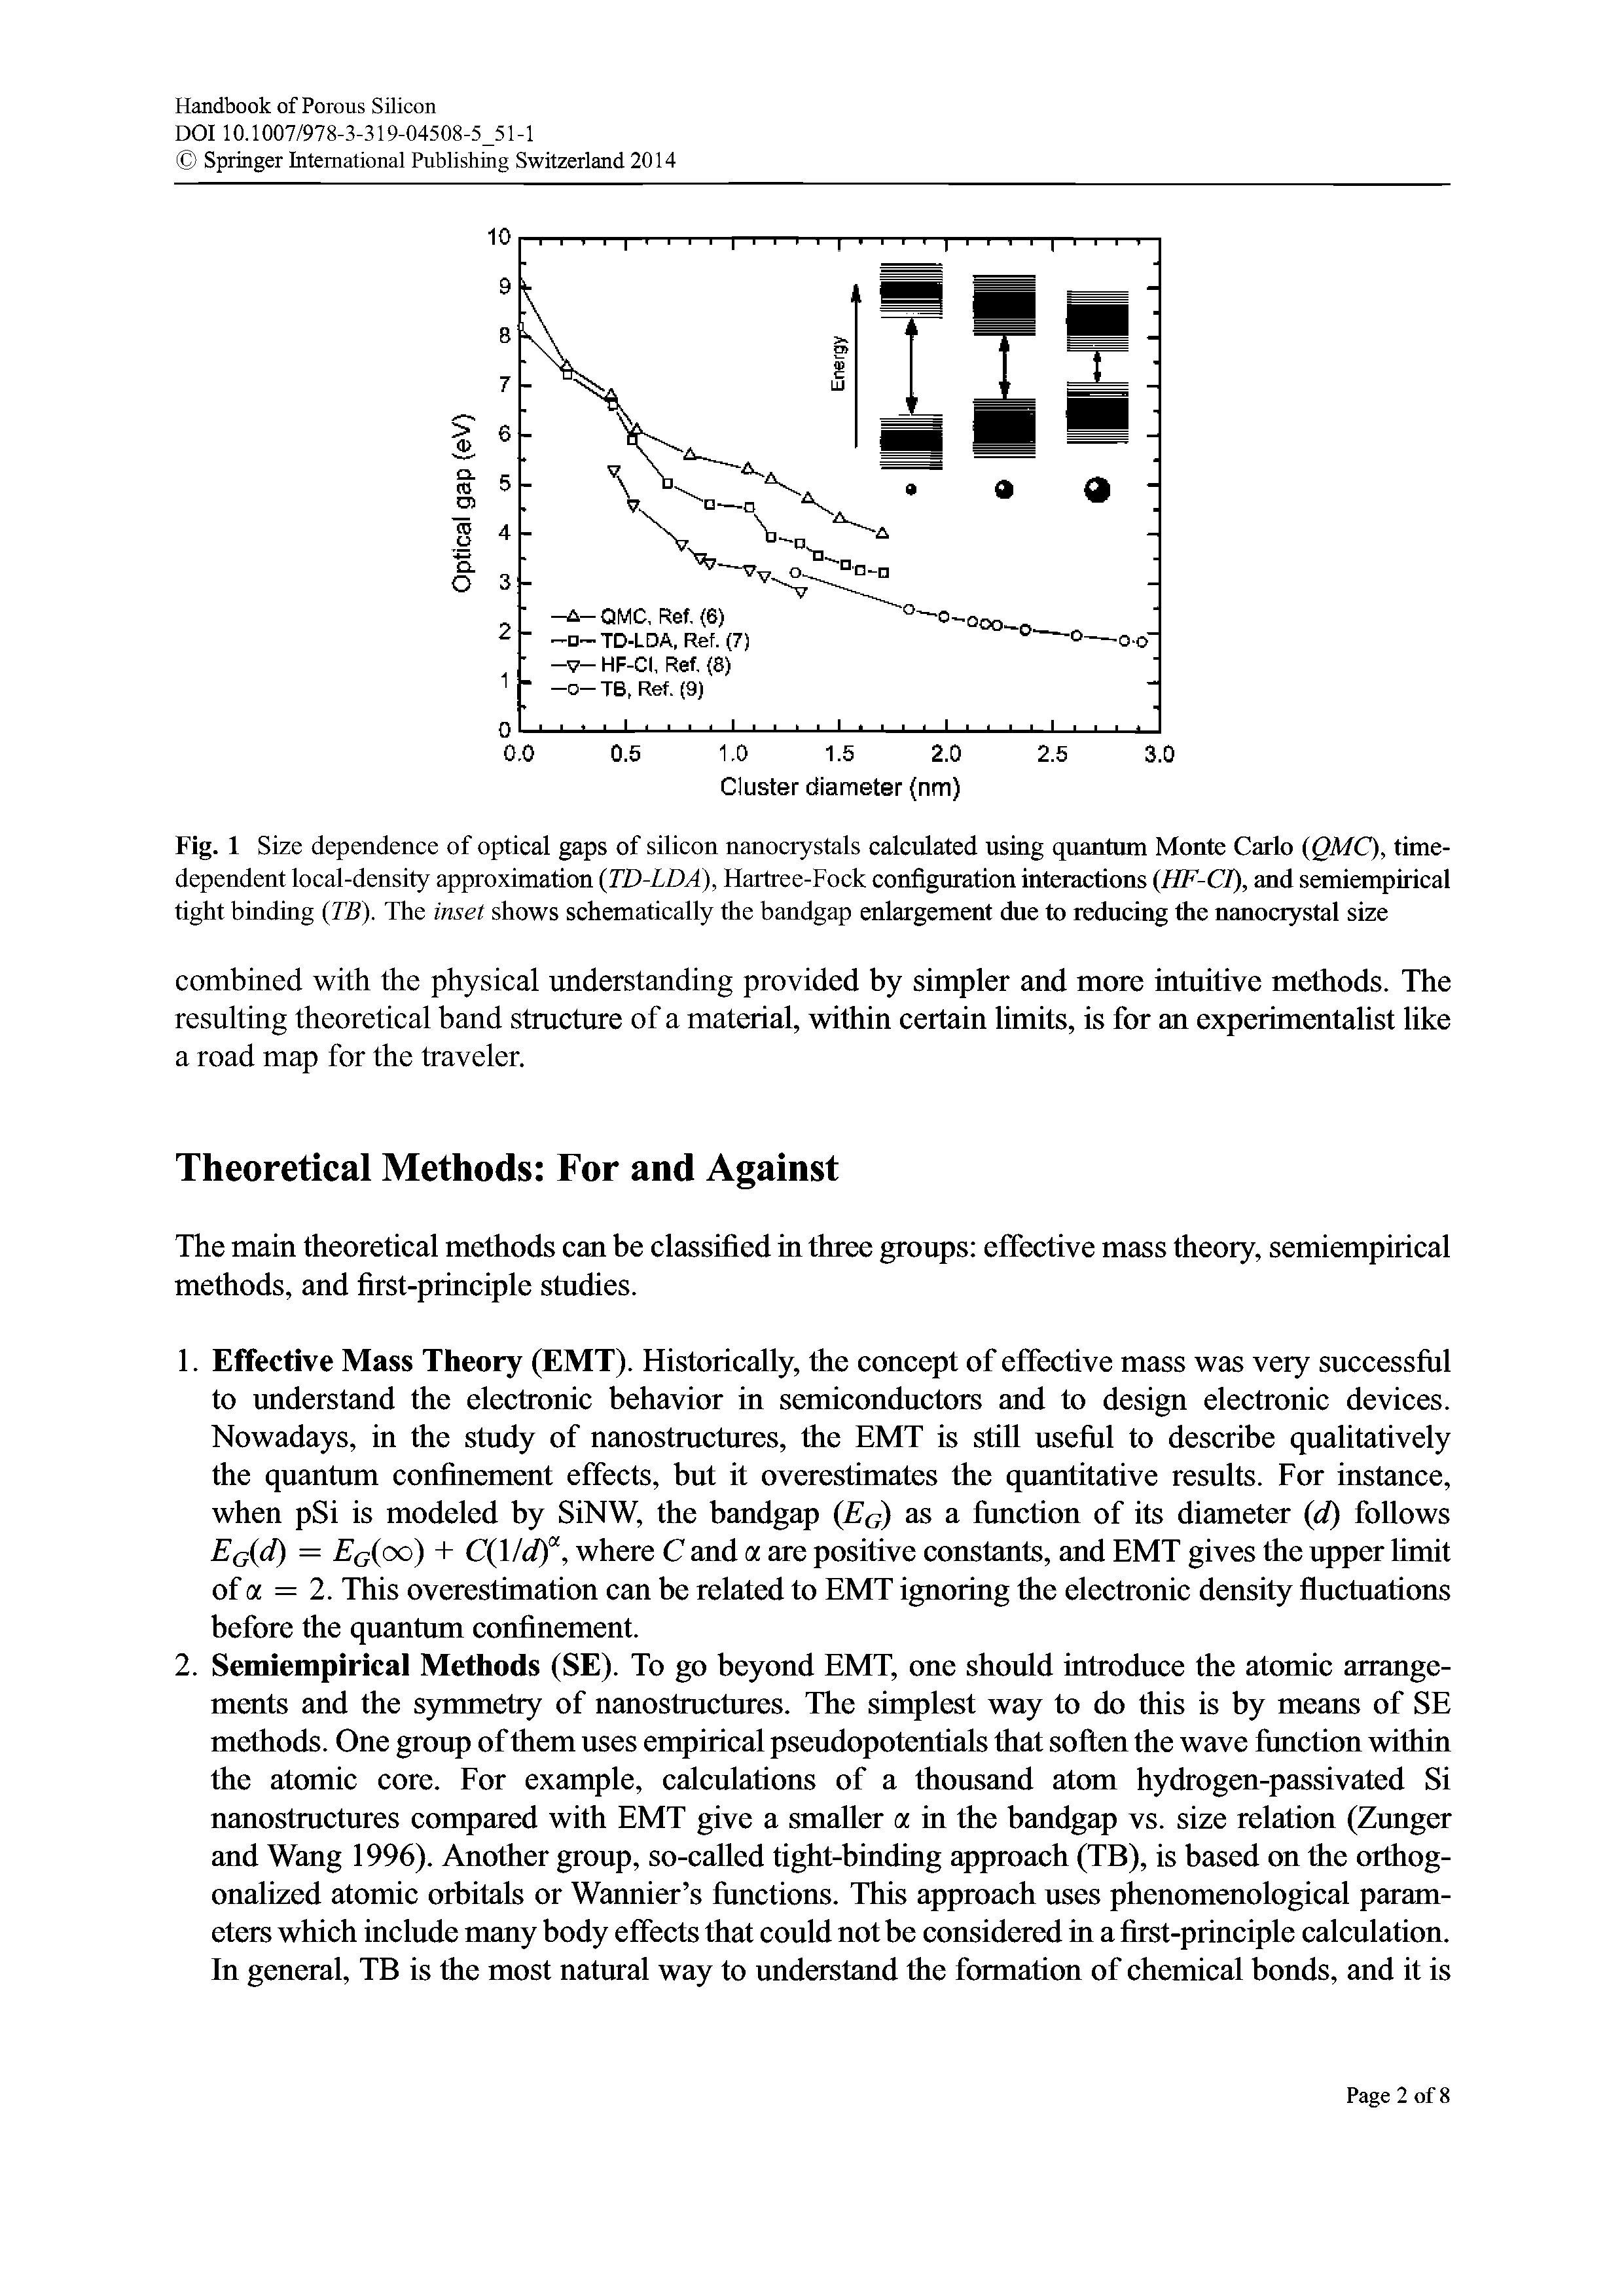 Fig. 1 Size dependence of optical gaps of silicon nanocrystals calculated using quantum Monte Carlo (QMC), time-dependent local-density approximation (TD-LDA), Hartree-Fock configuration interactions (HF-CI), and semiempirical tight binding (TB). The inset shows schematically the bandgap enlargement due to reducing die nanocrystal size...